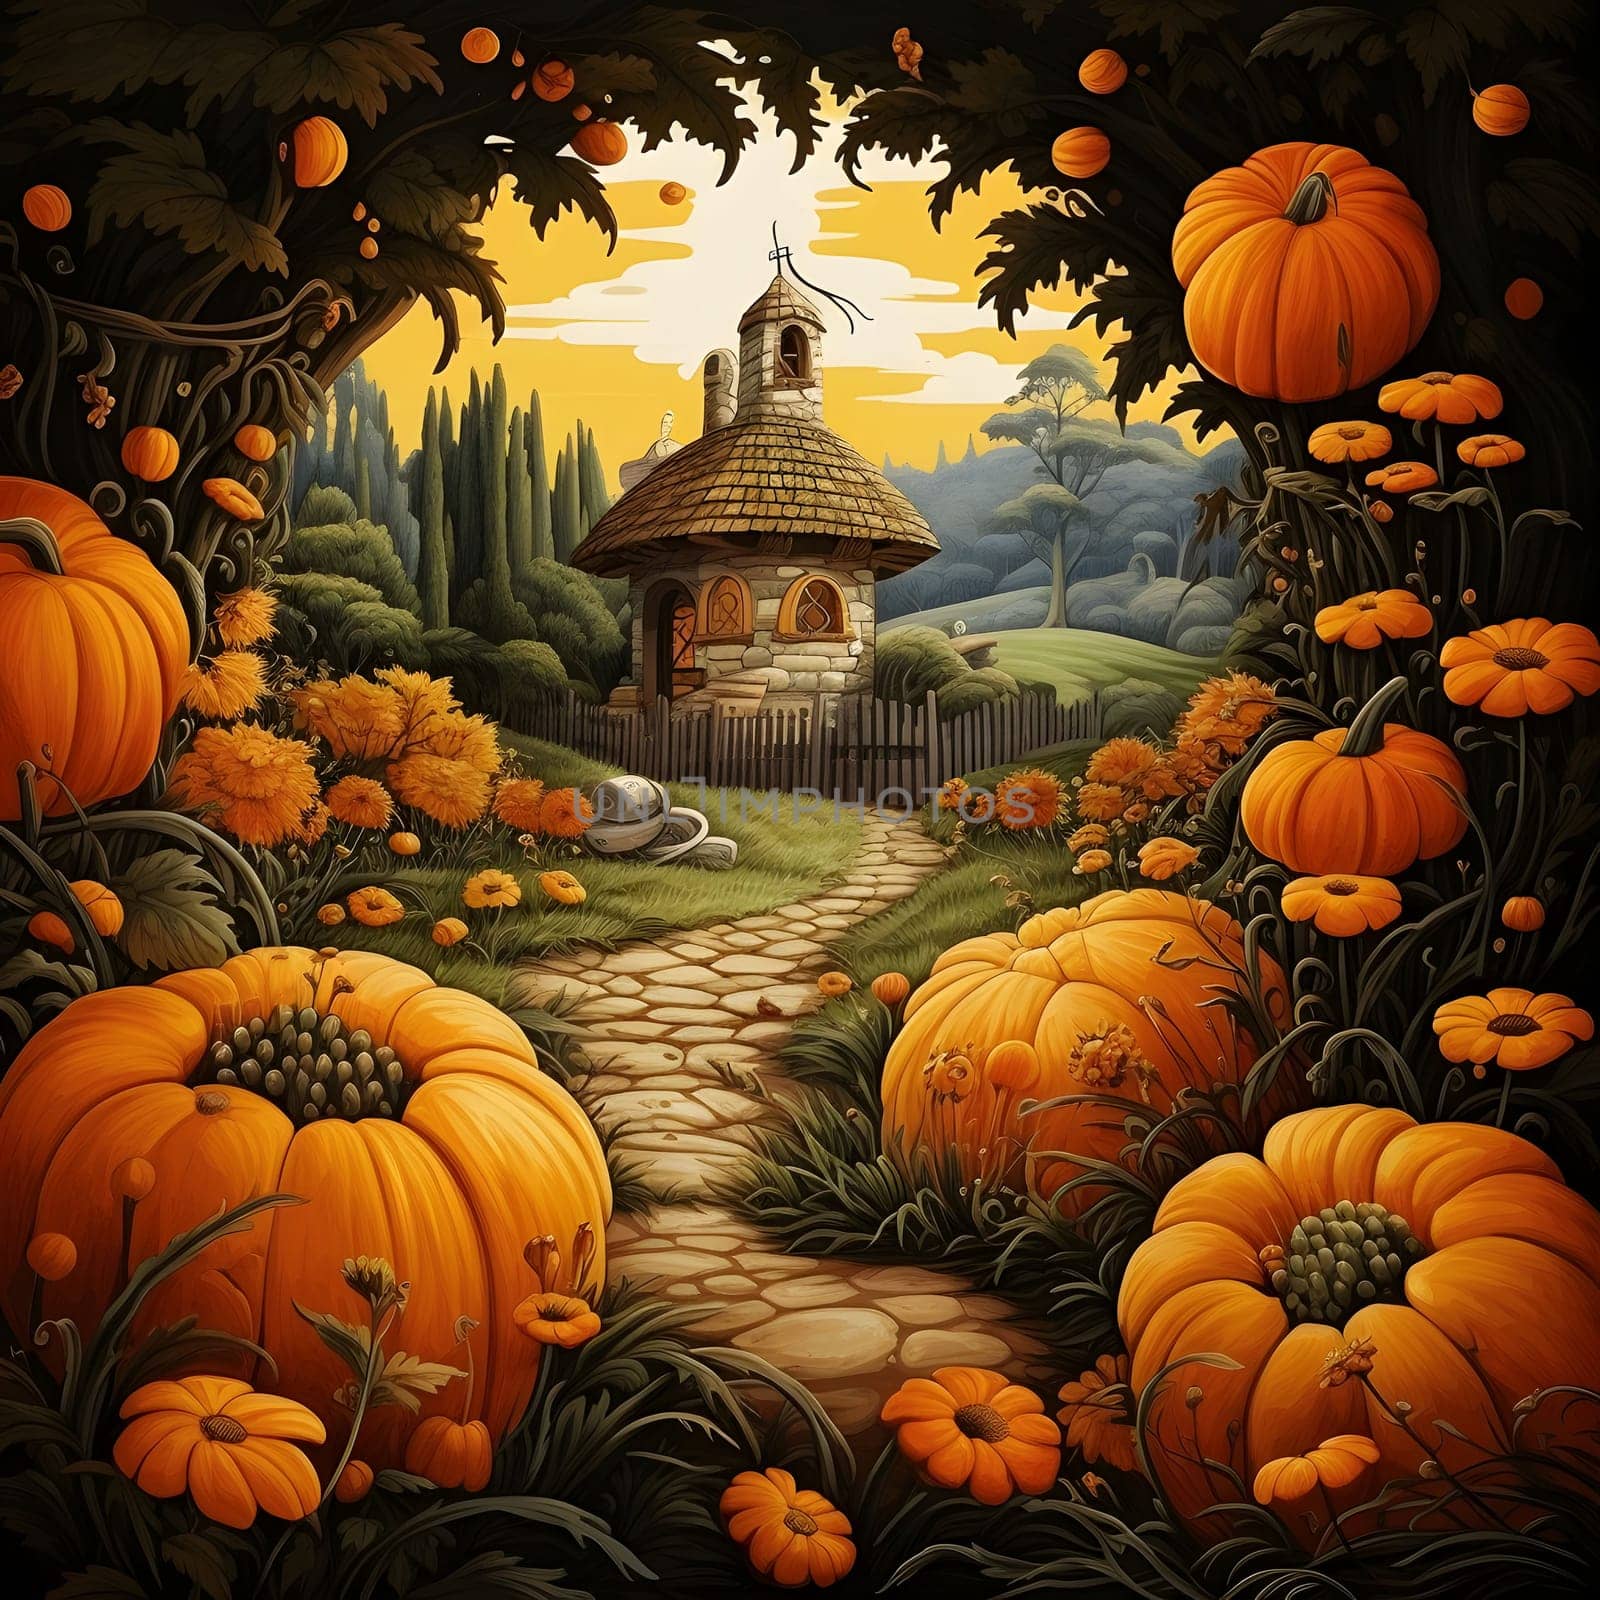 Illustration of stone tiny house around pumpkins, flowers, vegetation. Pumpkin as a dish of thanksgiving for the harvest. by ThemesS